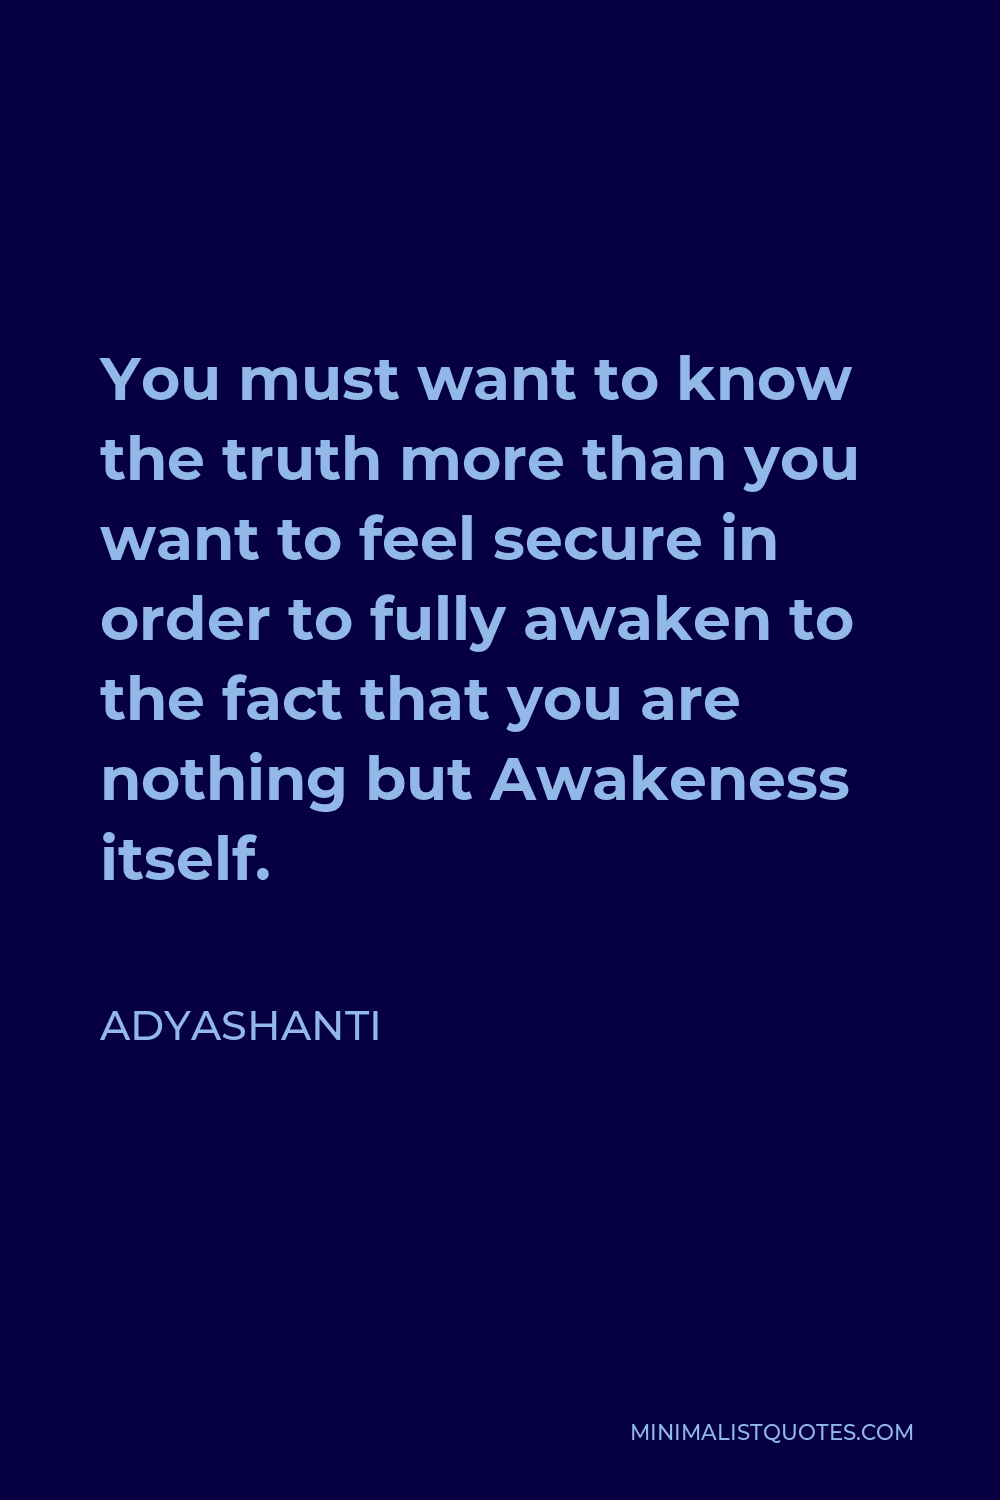 Adyashanti Quote - You must want to know the truth more than you want to feel secure in order to fully awaken to the fact that you are nothing but Awakeness itself.